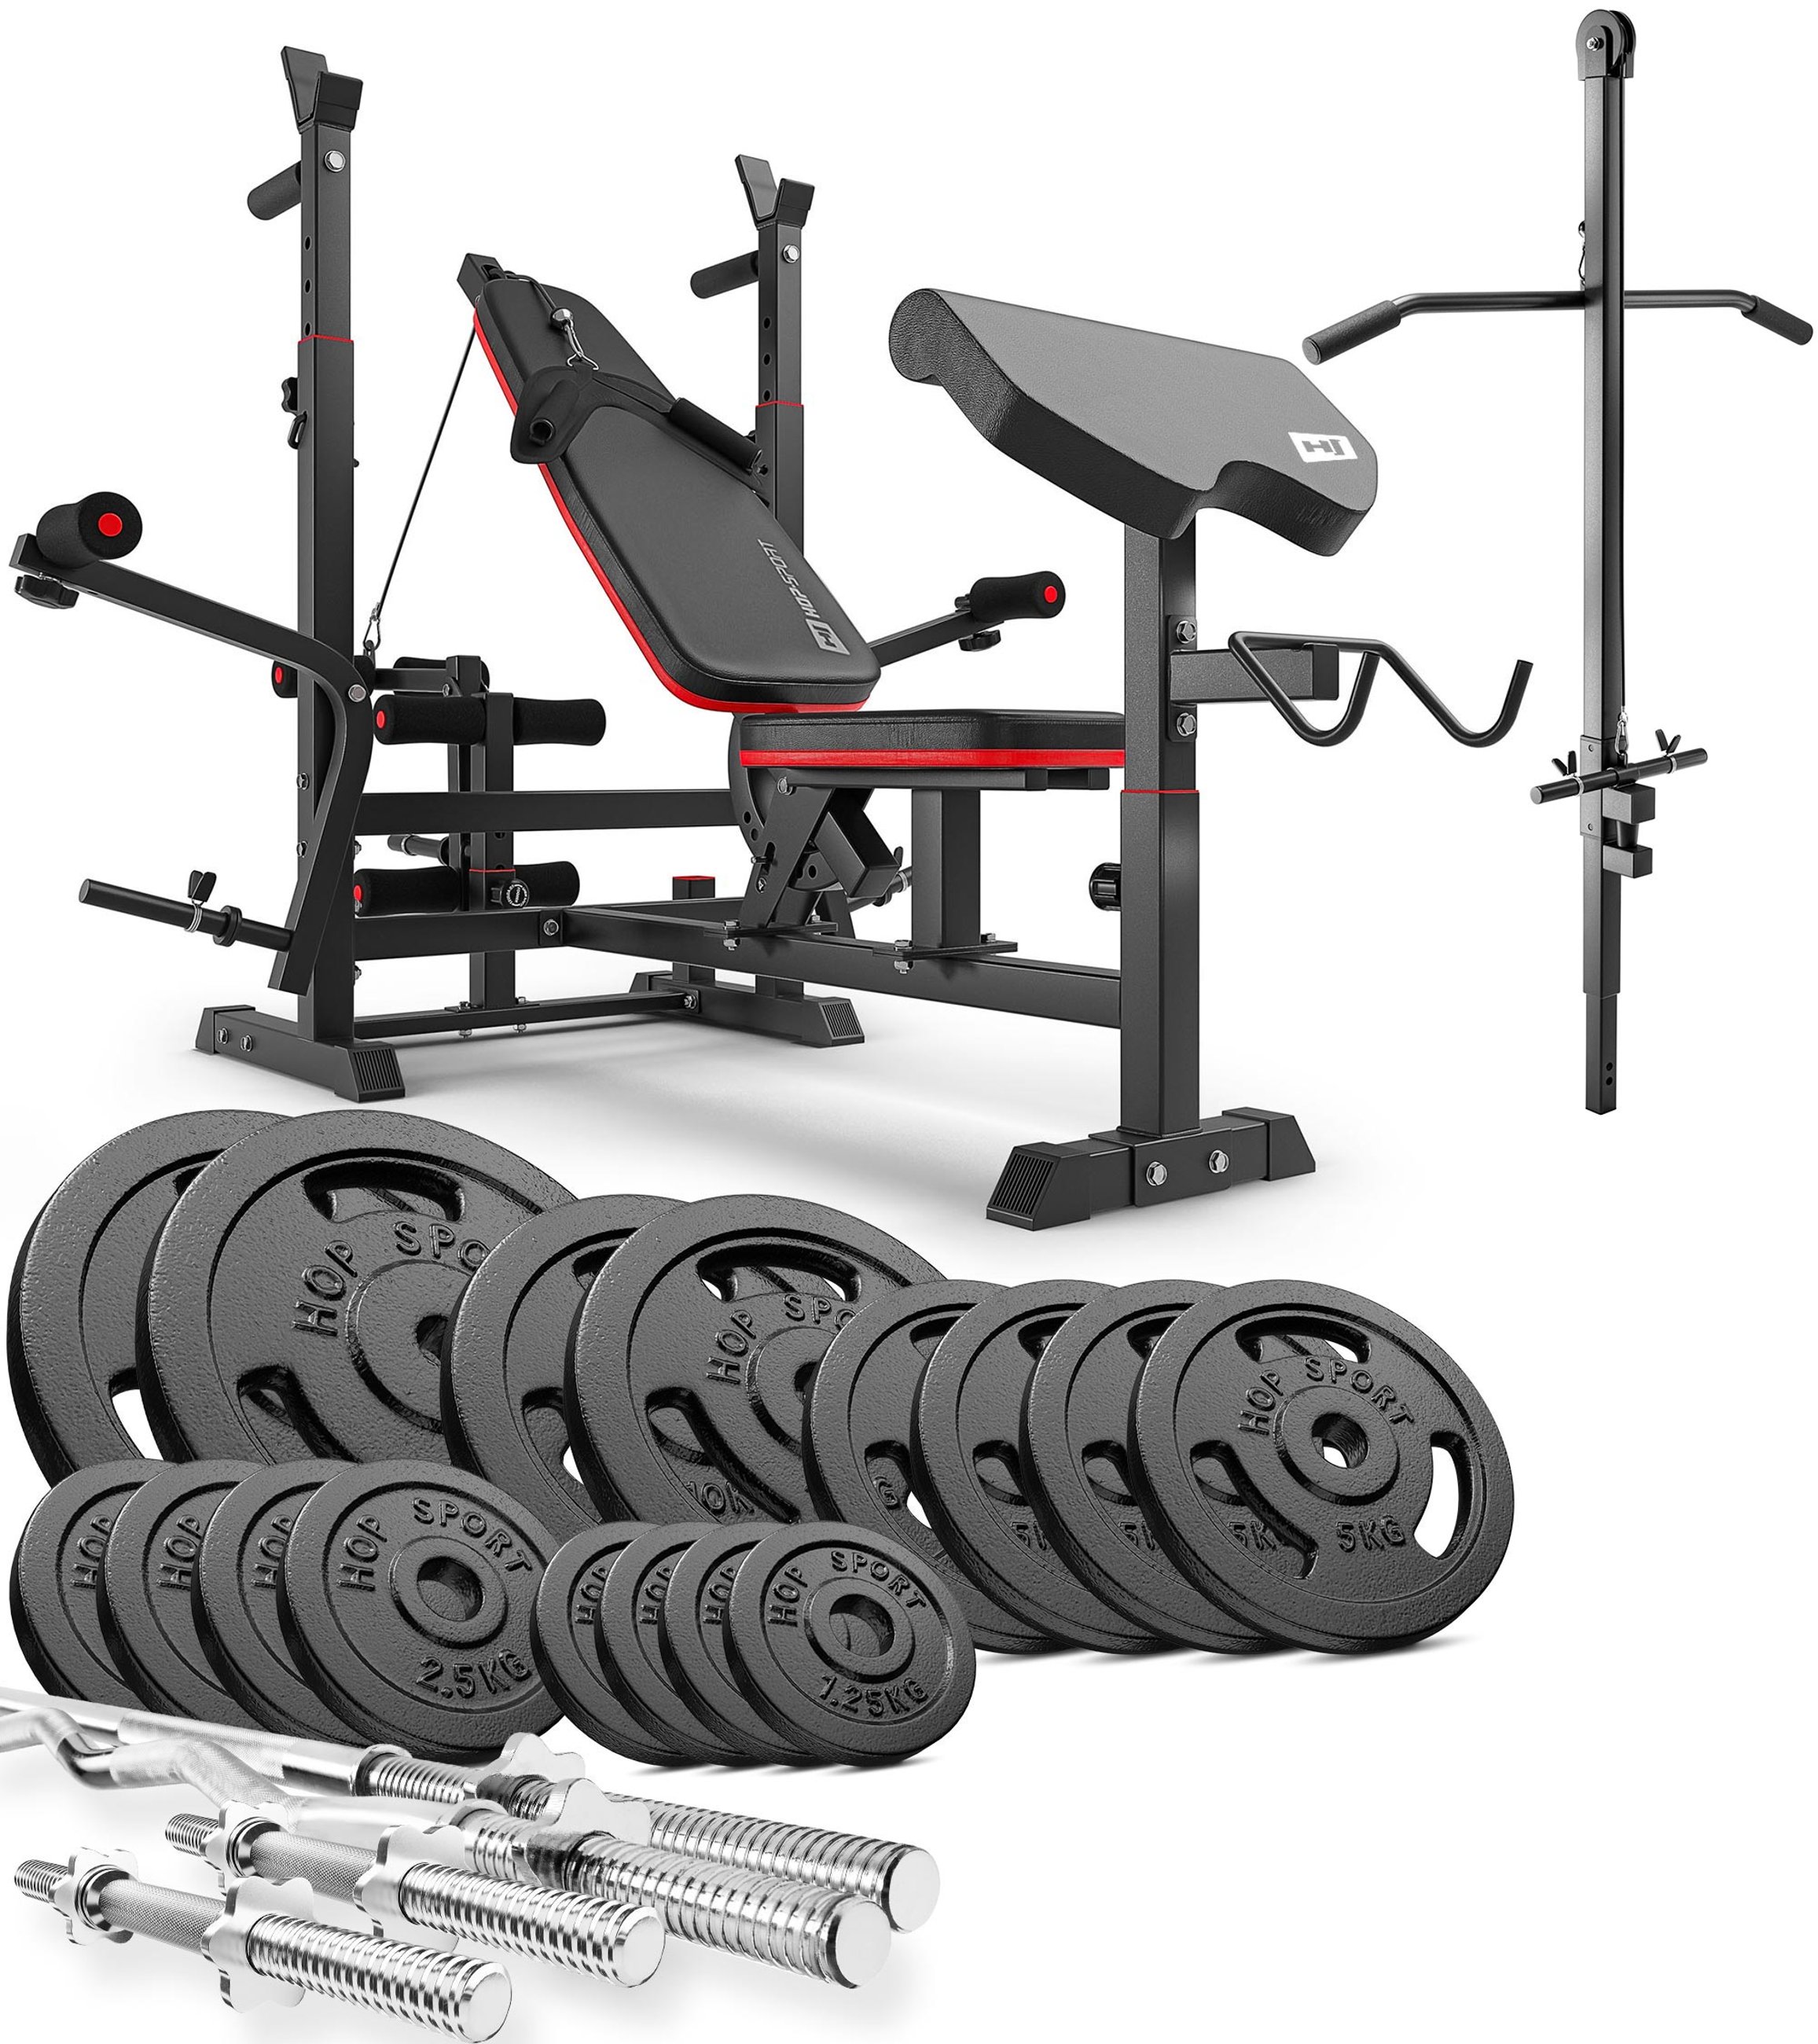 Strong 116 kg Cast Iron Barbell Set with HS-1075 Weight Bench